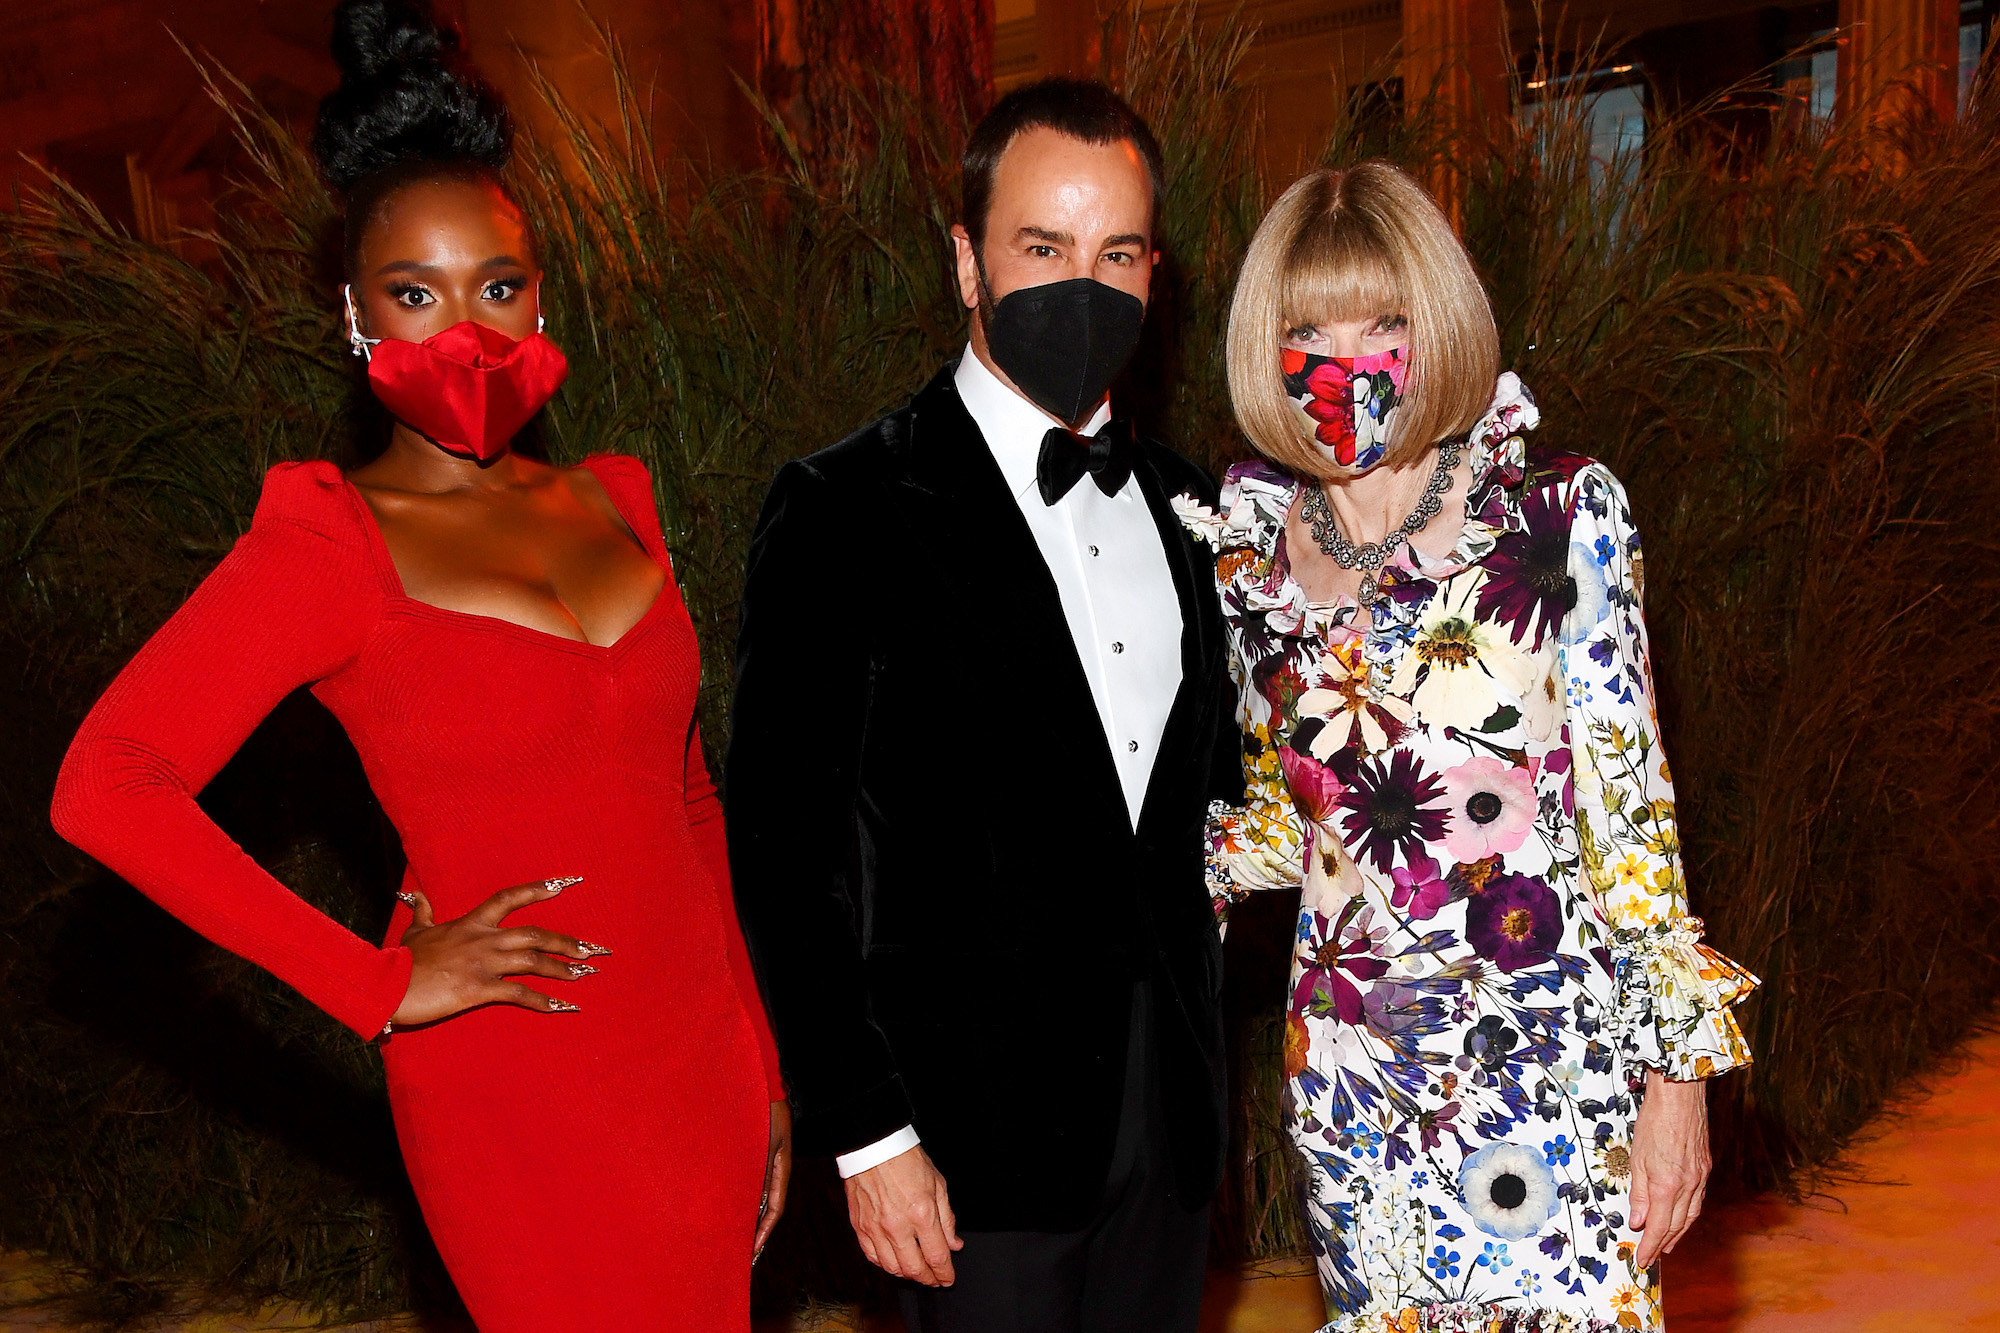 Anna, Tom Ford, and Jennifer Hudson, posing for a photo at the Met Gala as they all wear face masks